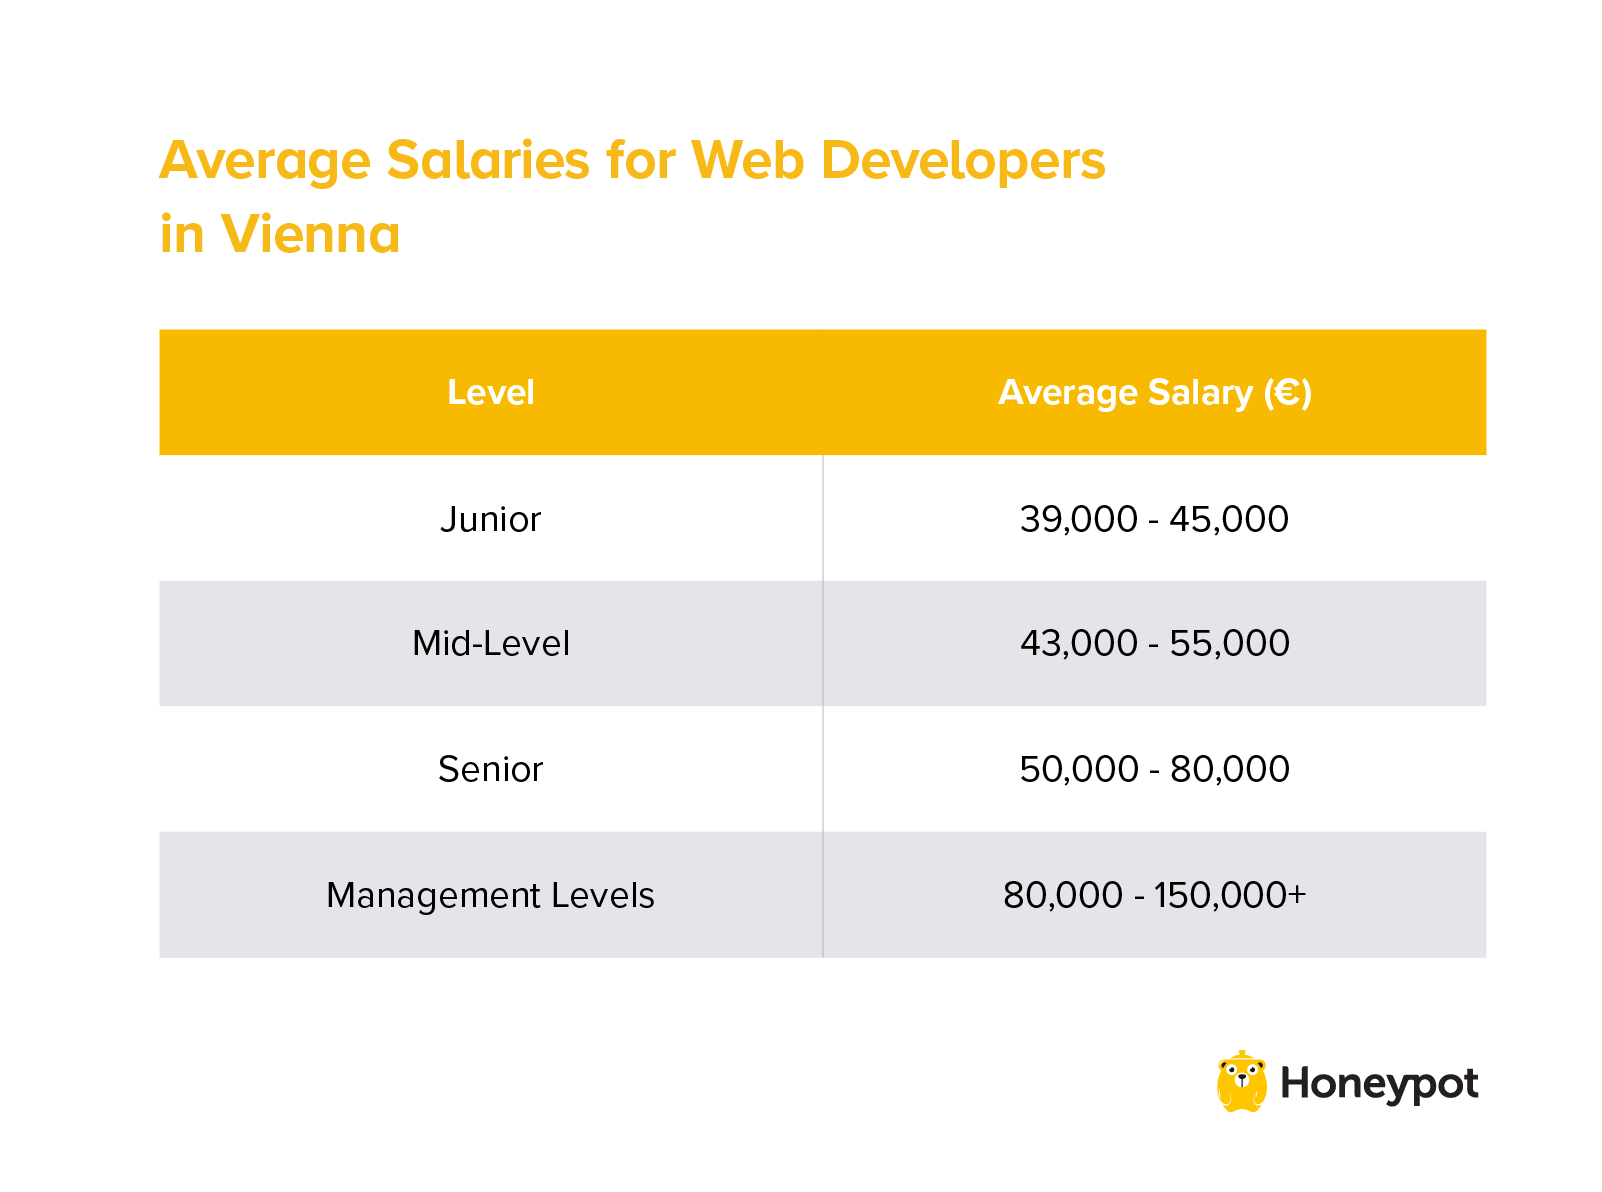 Average salaries for web developers in Vienna